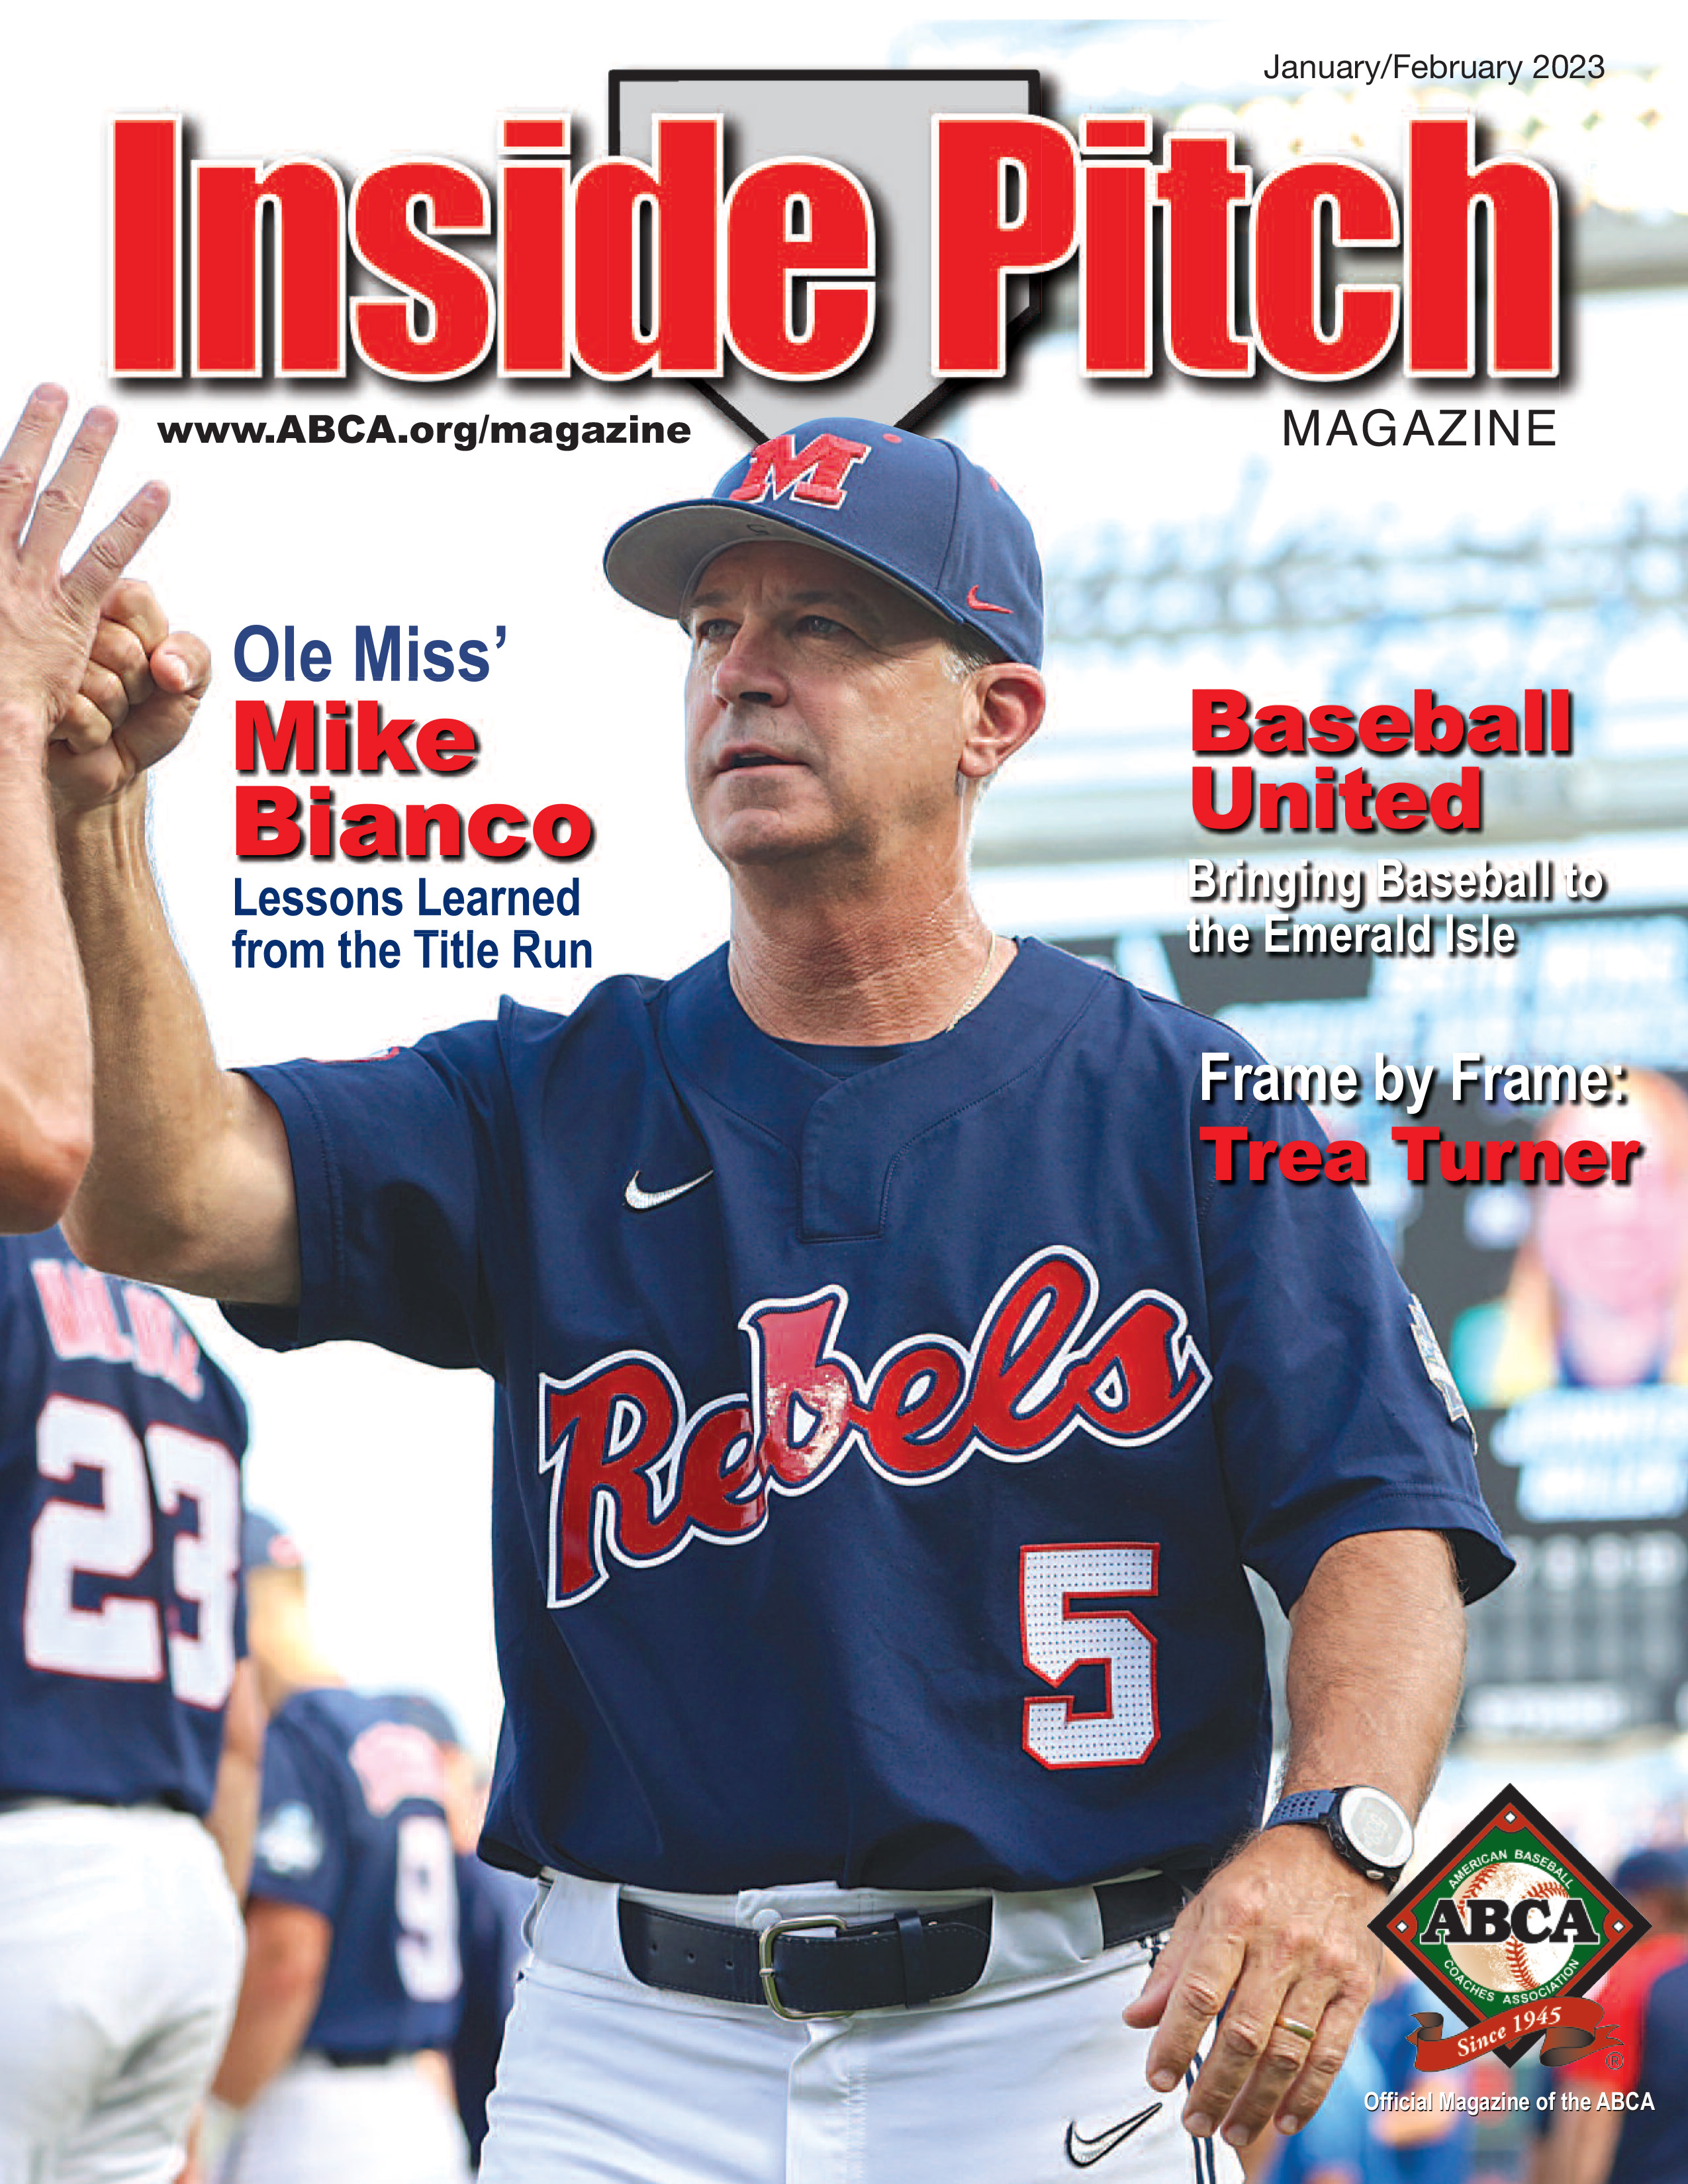 Inside Pitch Magazine Cover with Mike Bianco